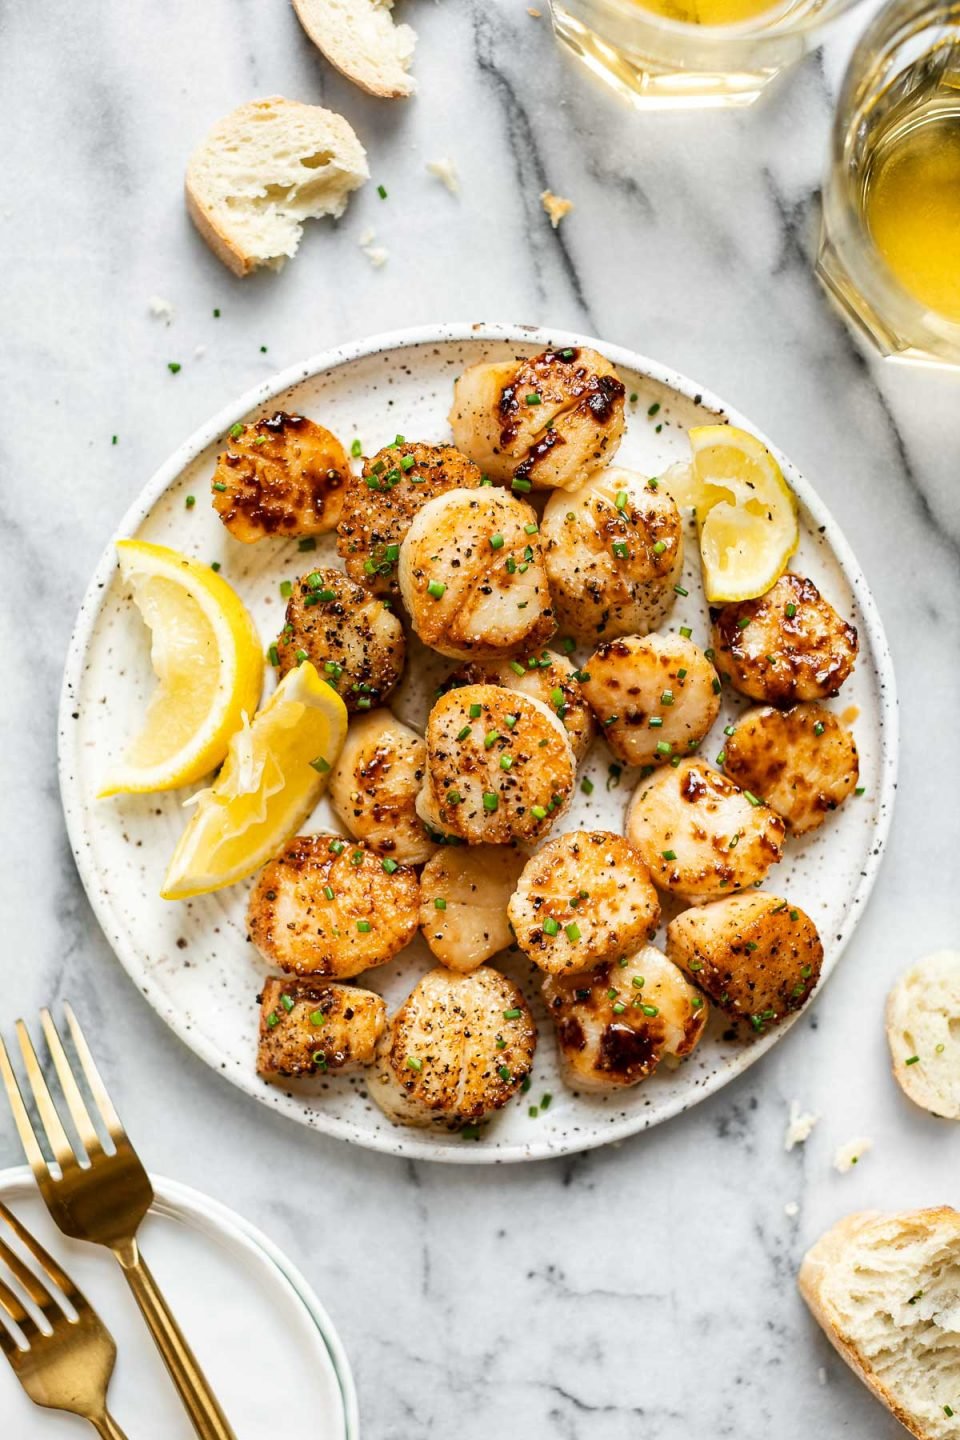 Seared scallops shown on a speckled ceramic plate, topped with freshly snipped chives & next to lemon wedges. The plate sits atop a white marbled surface surrounded by sliced, crusty bread, white wine in glasses, & gold flatware.